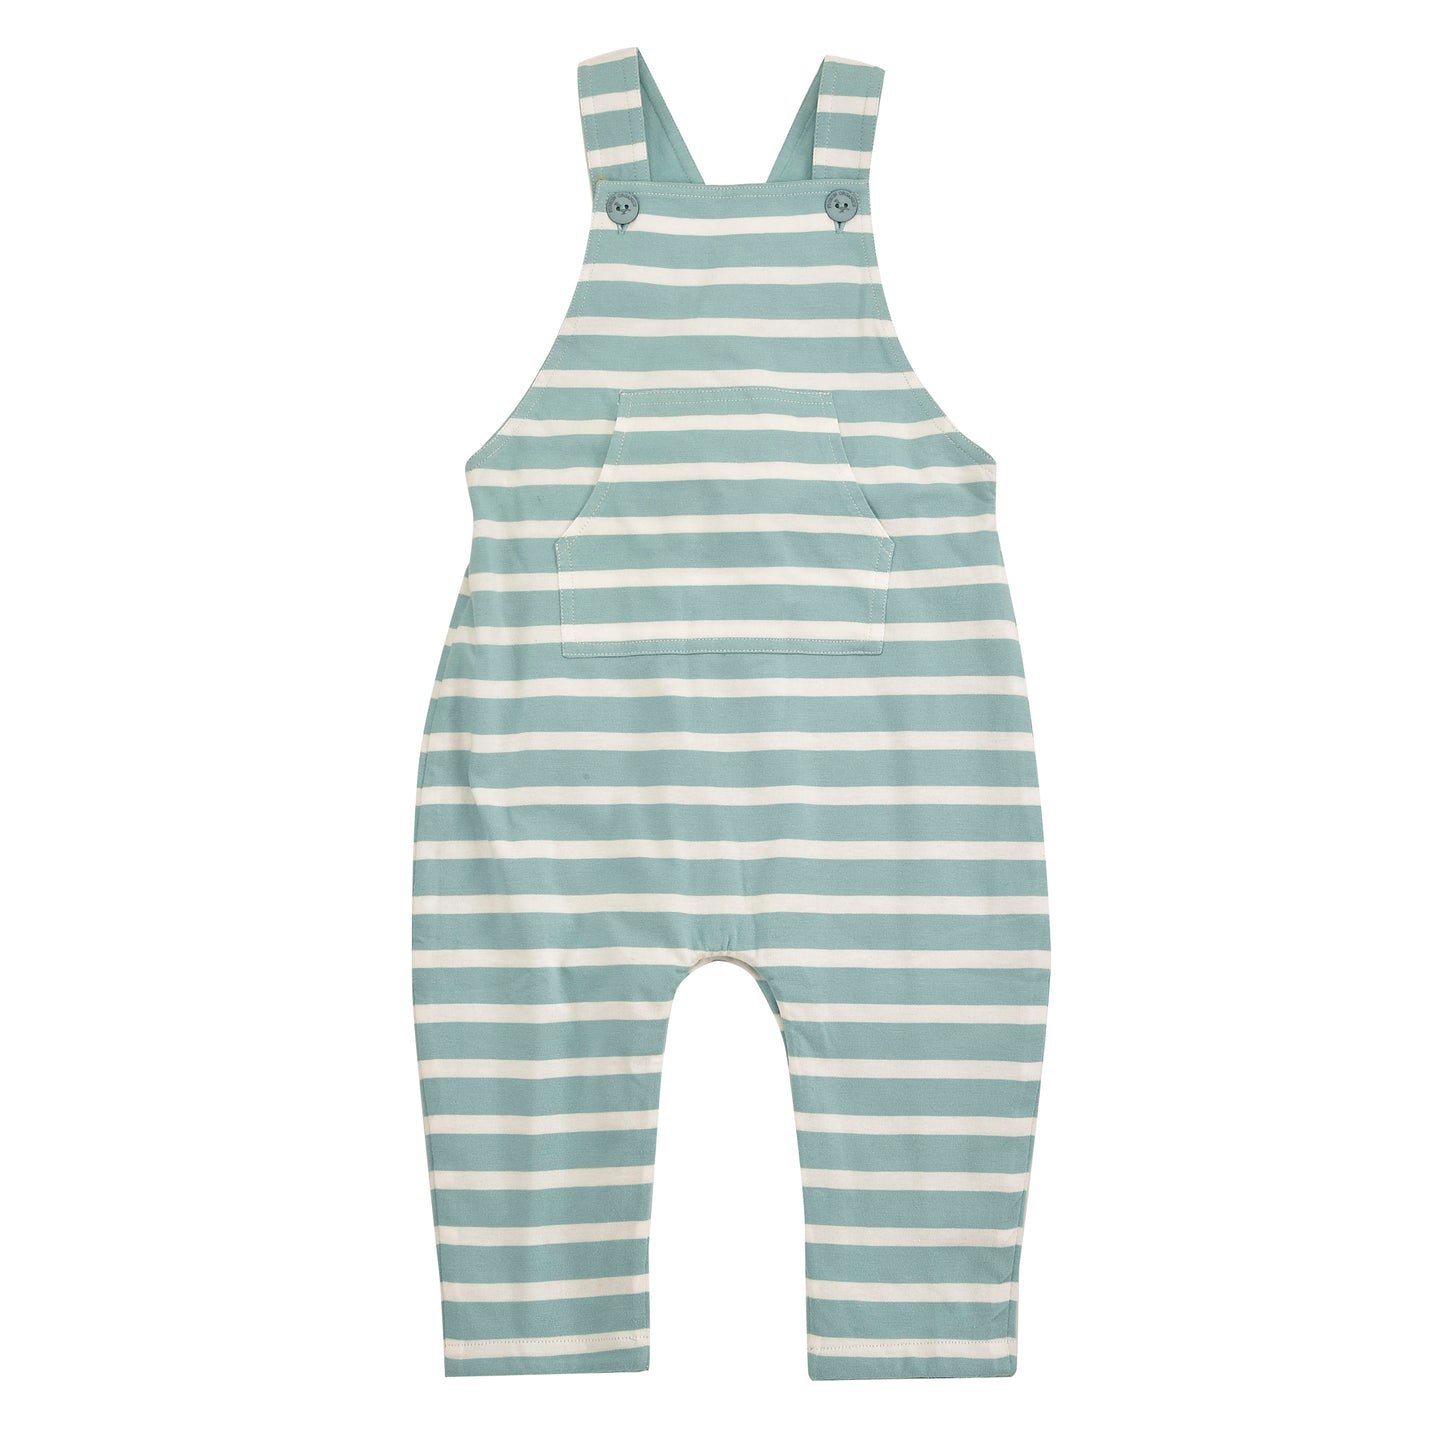 Turquoise and white striped dungarees